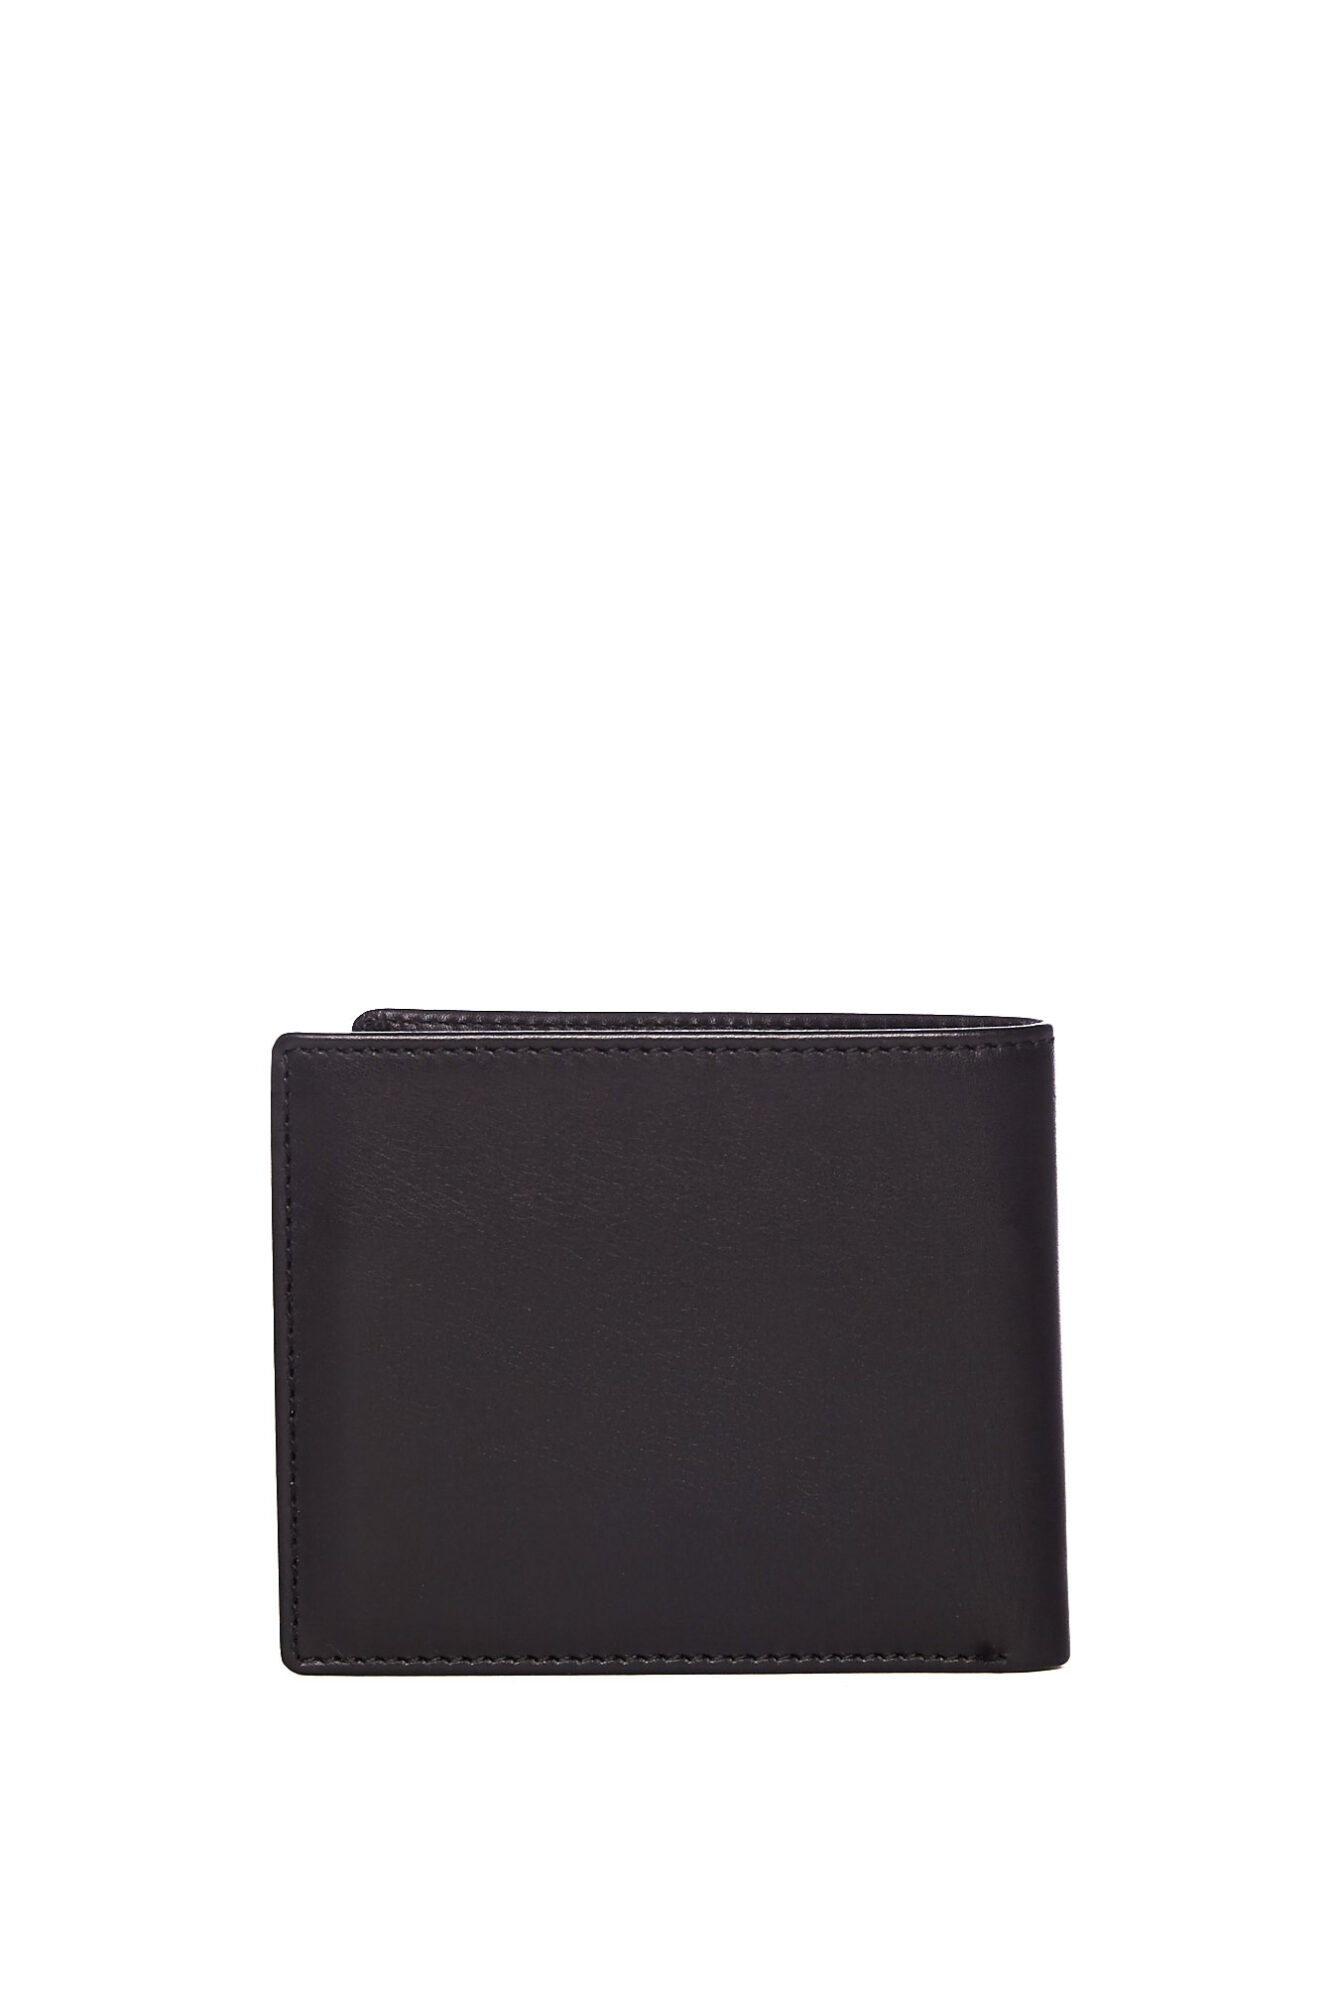 Women's Wallets - Chic Wallets for Ladies Made high-end Materials